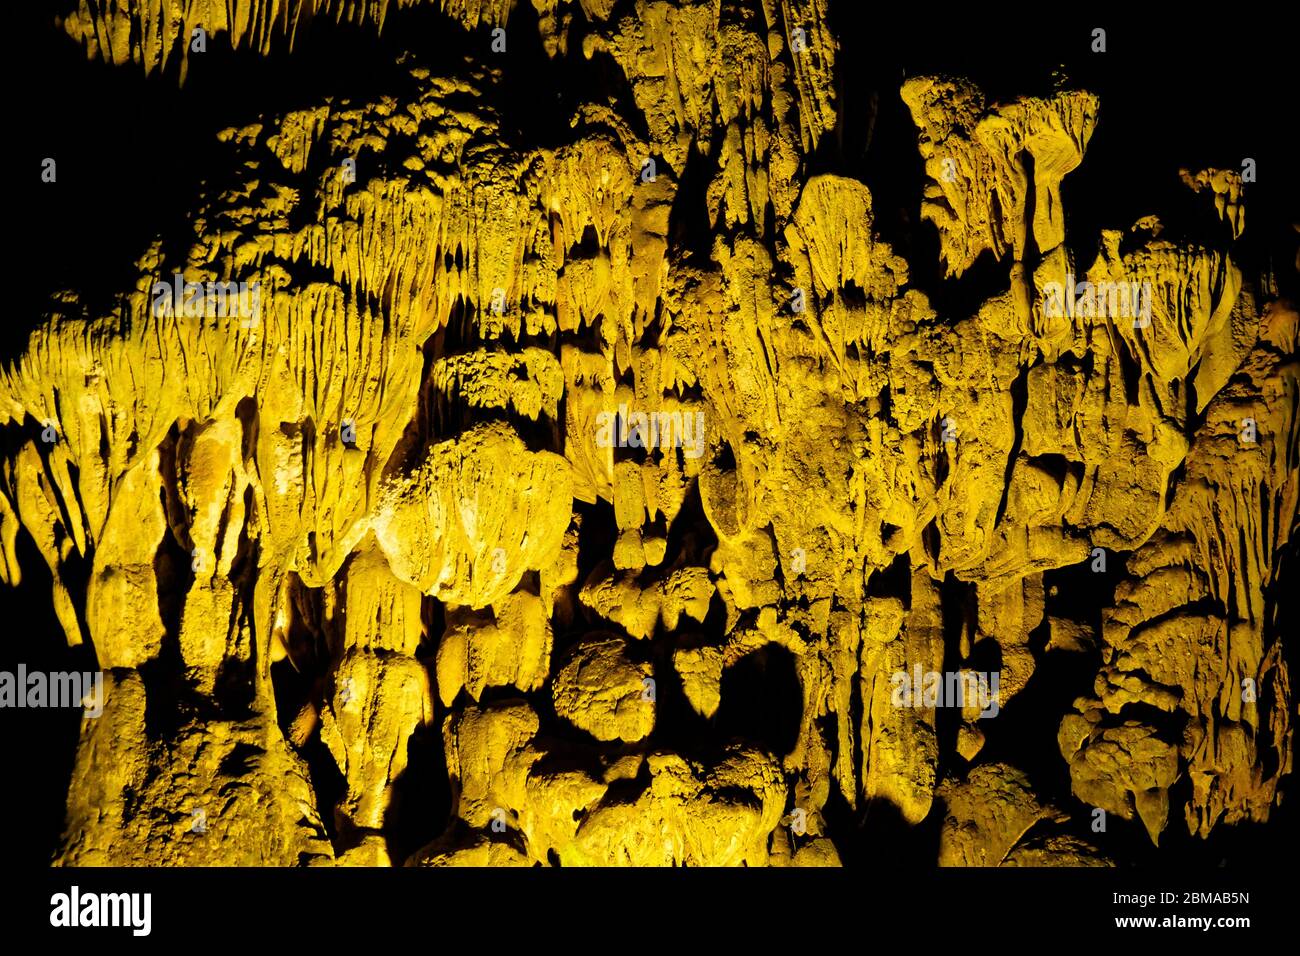 The Sung Sot cave, or the cave of surprises, is the best-known cave in Halong Bay and one of the most spectacular (Vietnam). Stock Photo